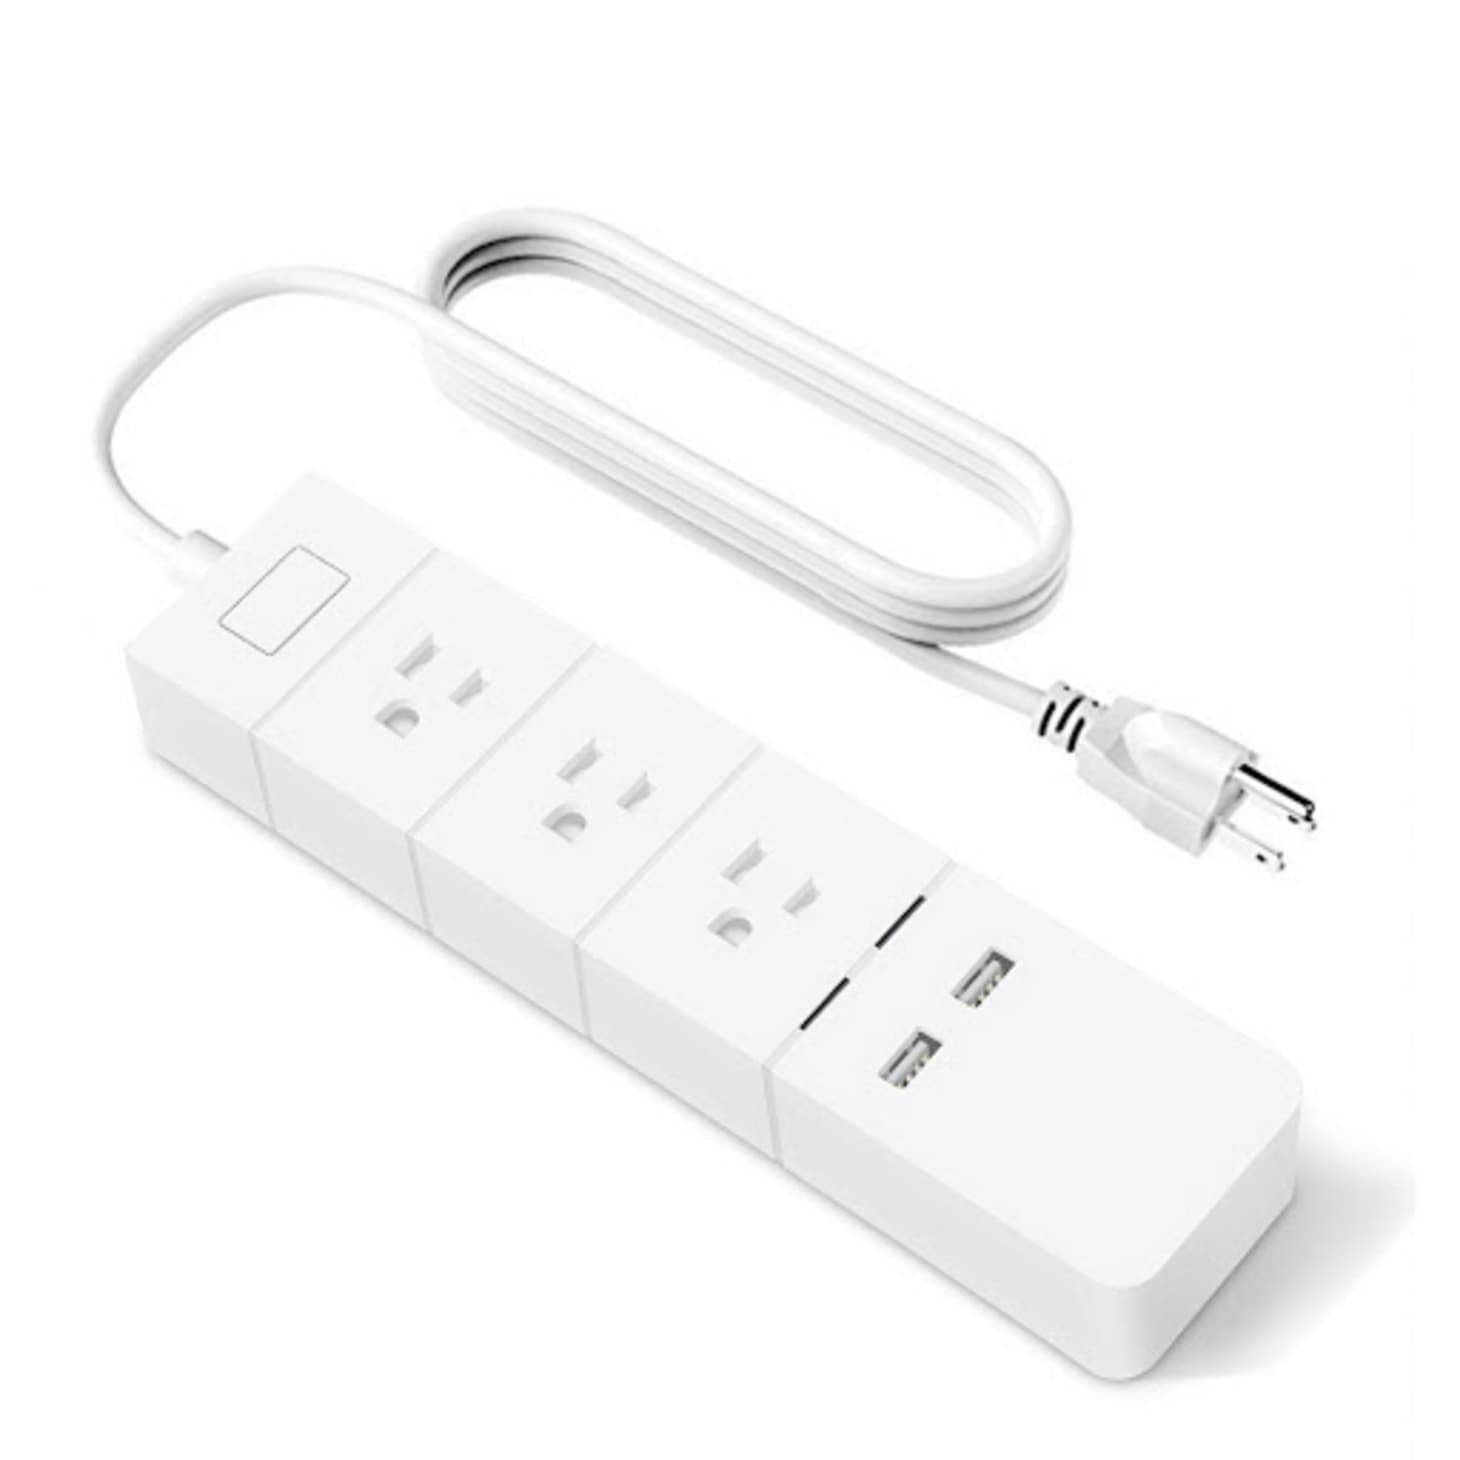 Amazon Affordable Smart Power Strip Review | Apartment Therapy